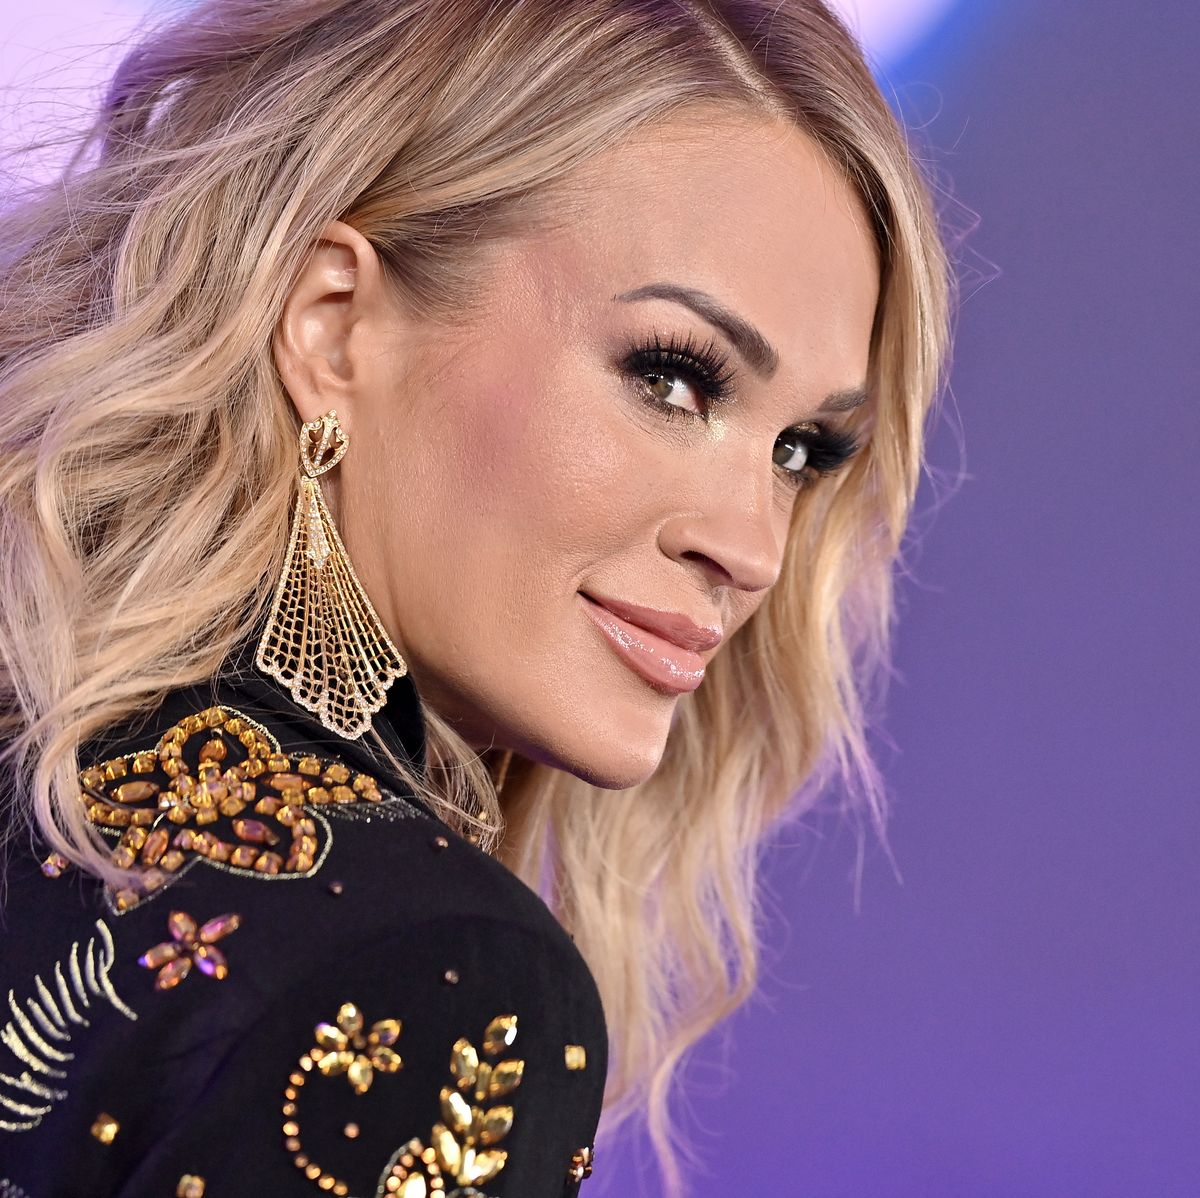 Yes, Carrie Underwood's new concert tour will hit SF